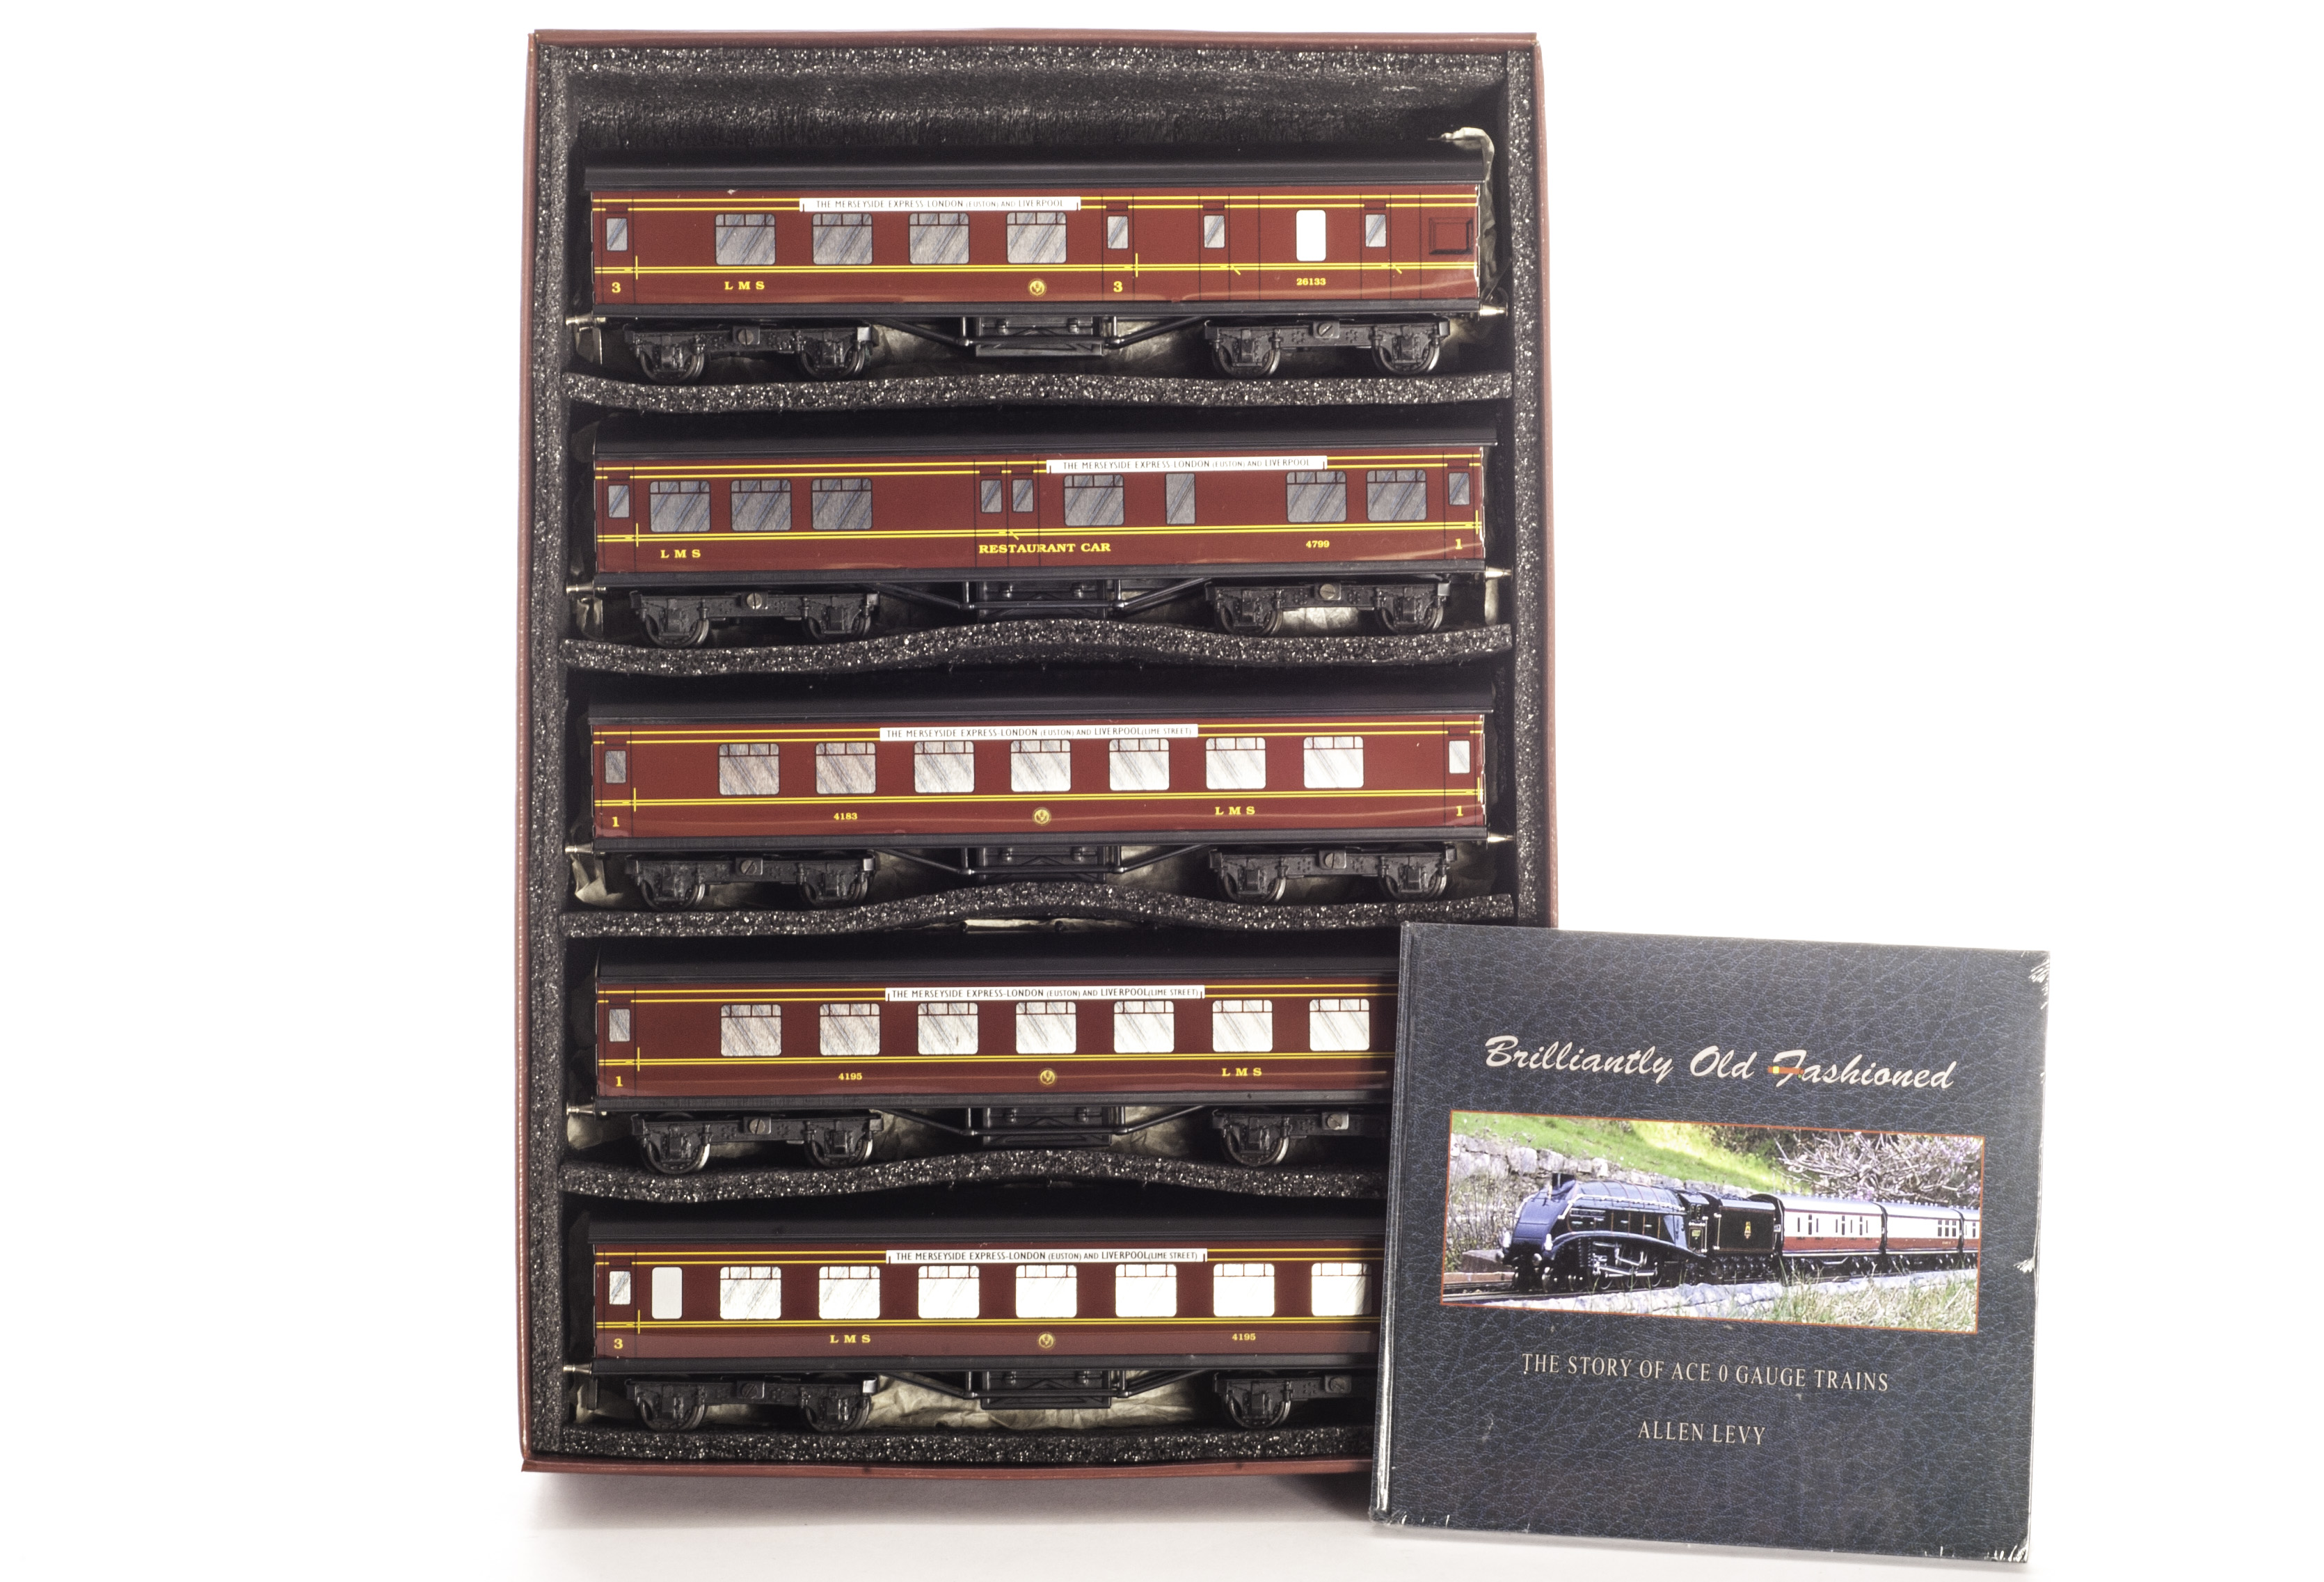 An ACE Trains LMS C2 5-Coach Set, comprising All 3rd, 3rd/Brake, Restaurant Car, All 1st and 1st /